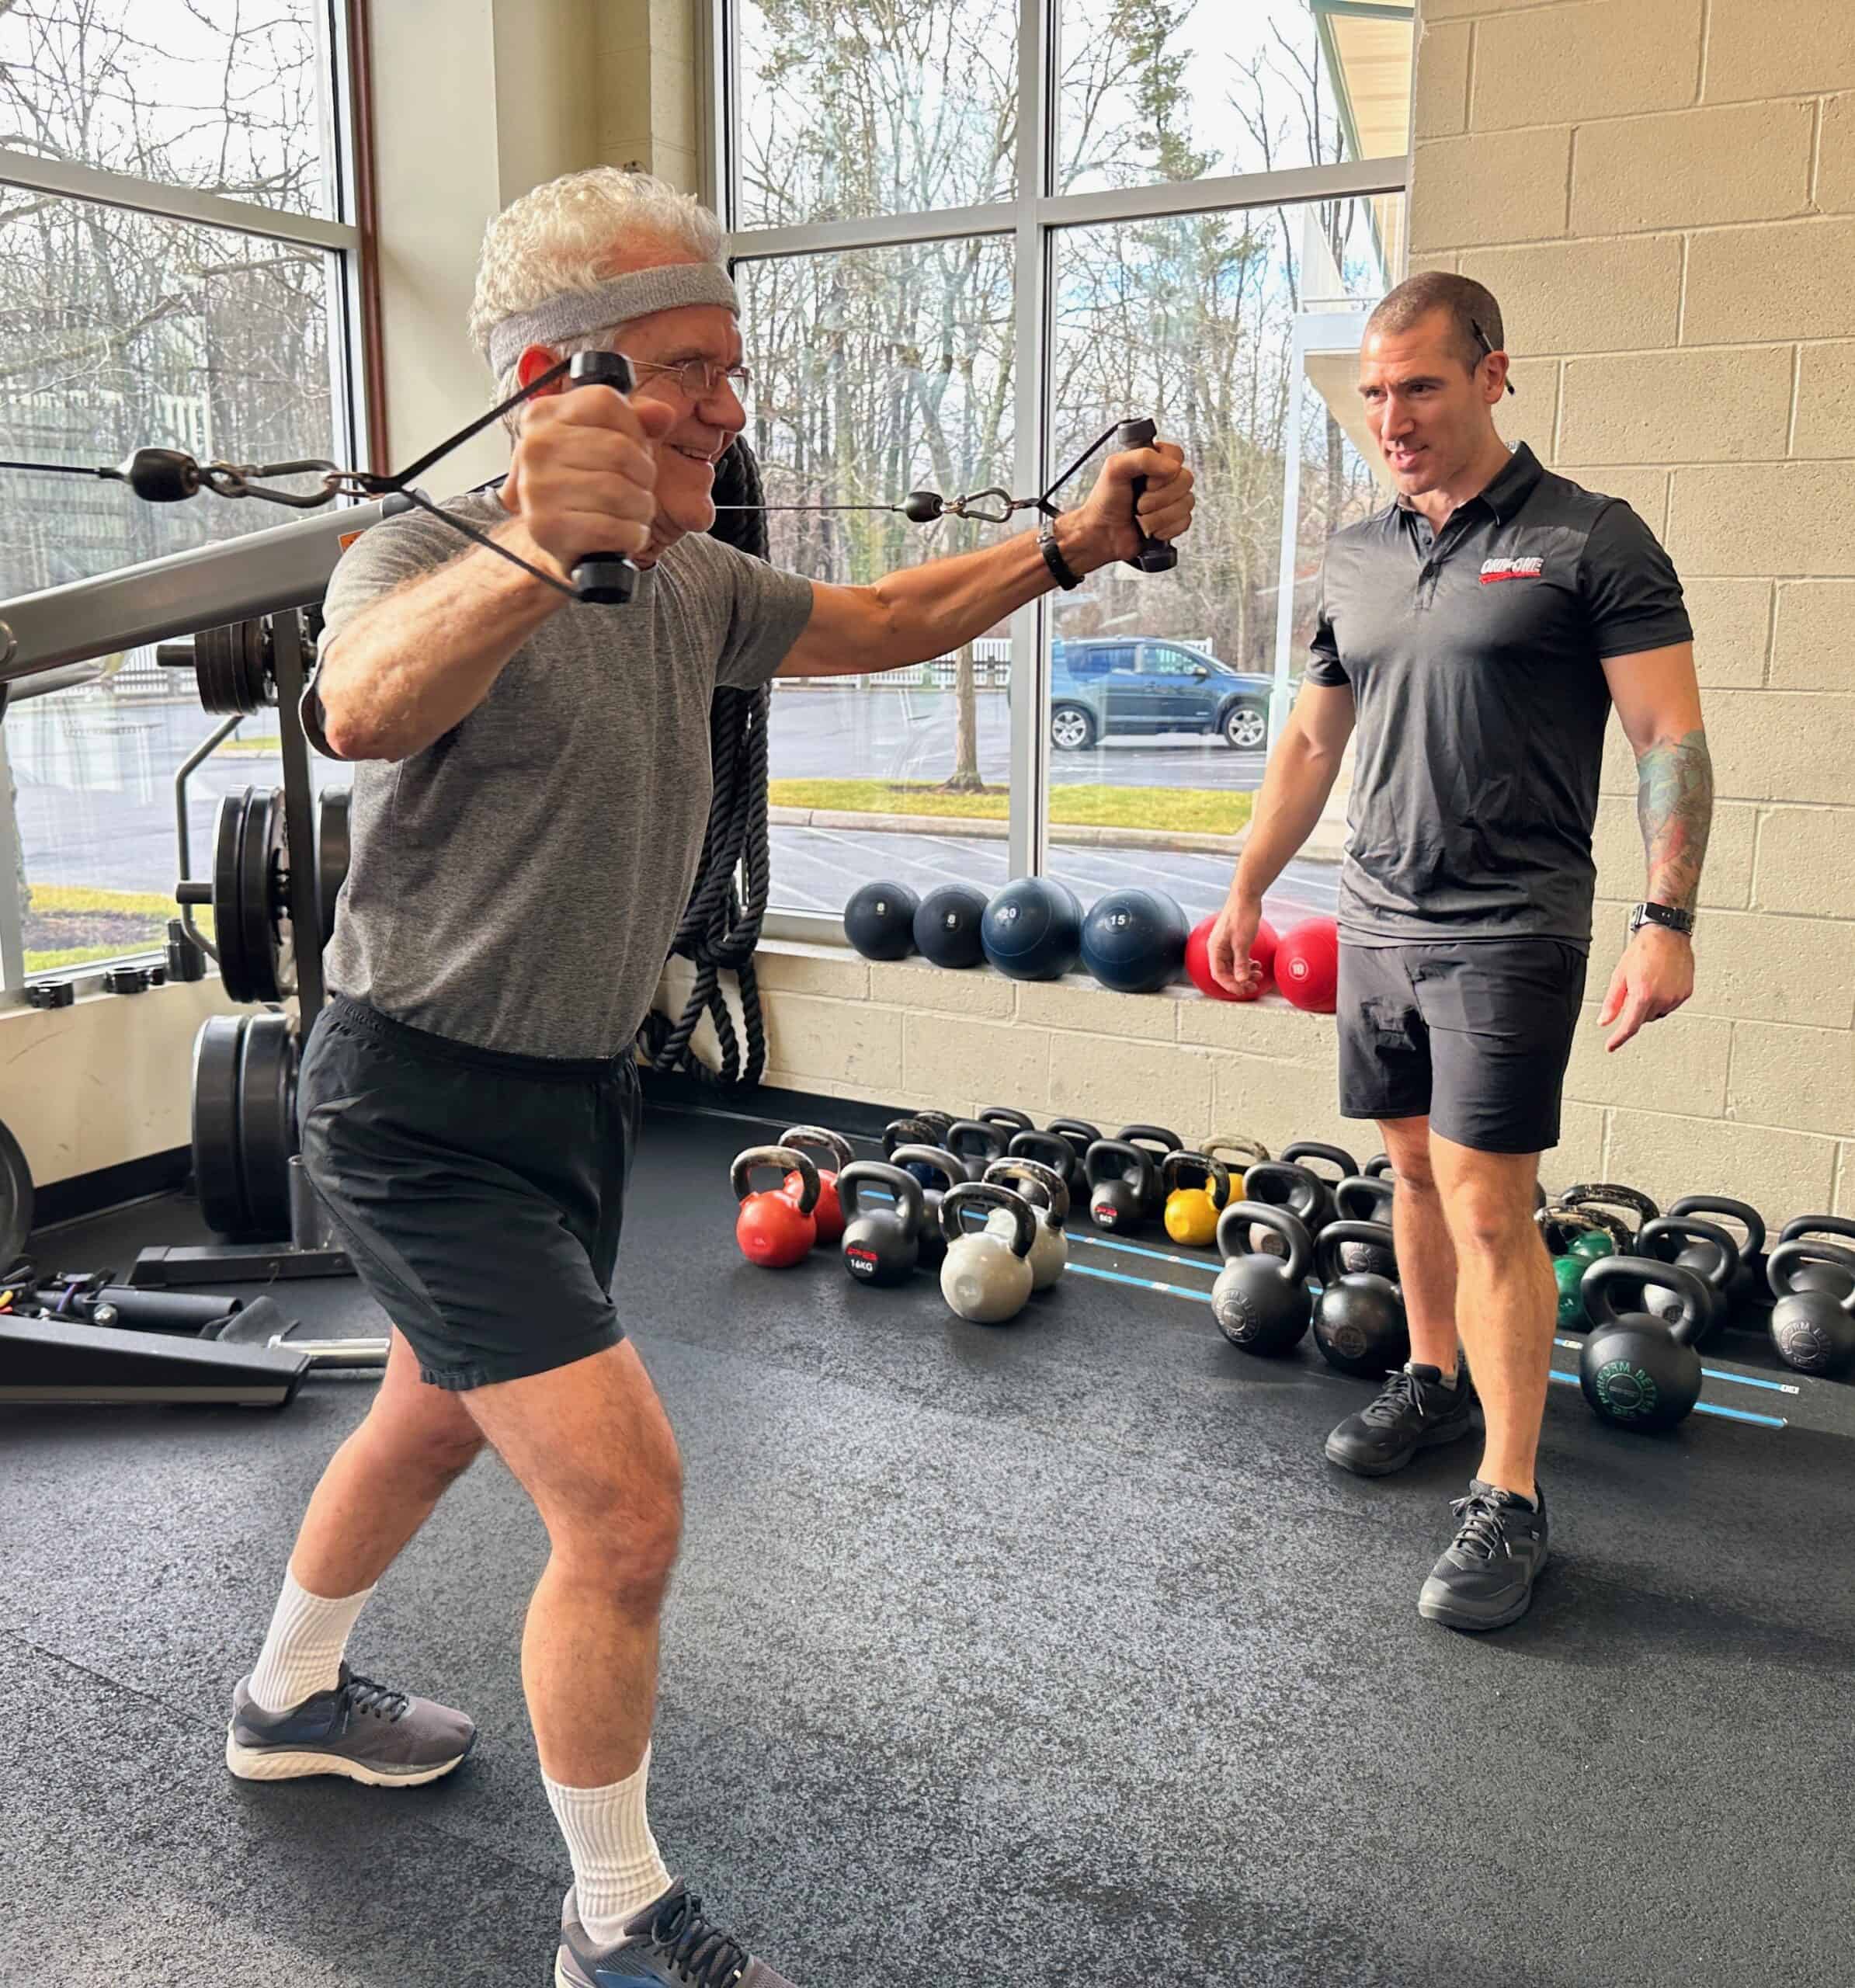 Jack Basiago training with personal trainer and registered dietitian, Geoff Borro